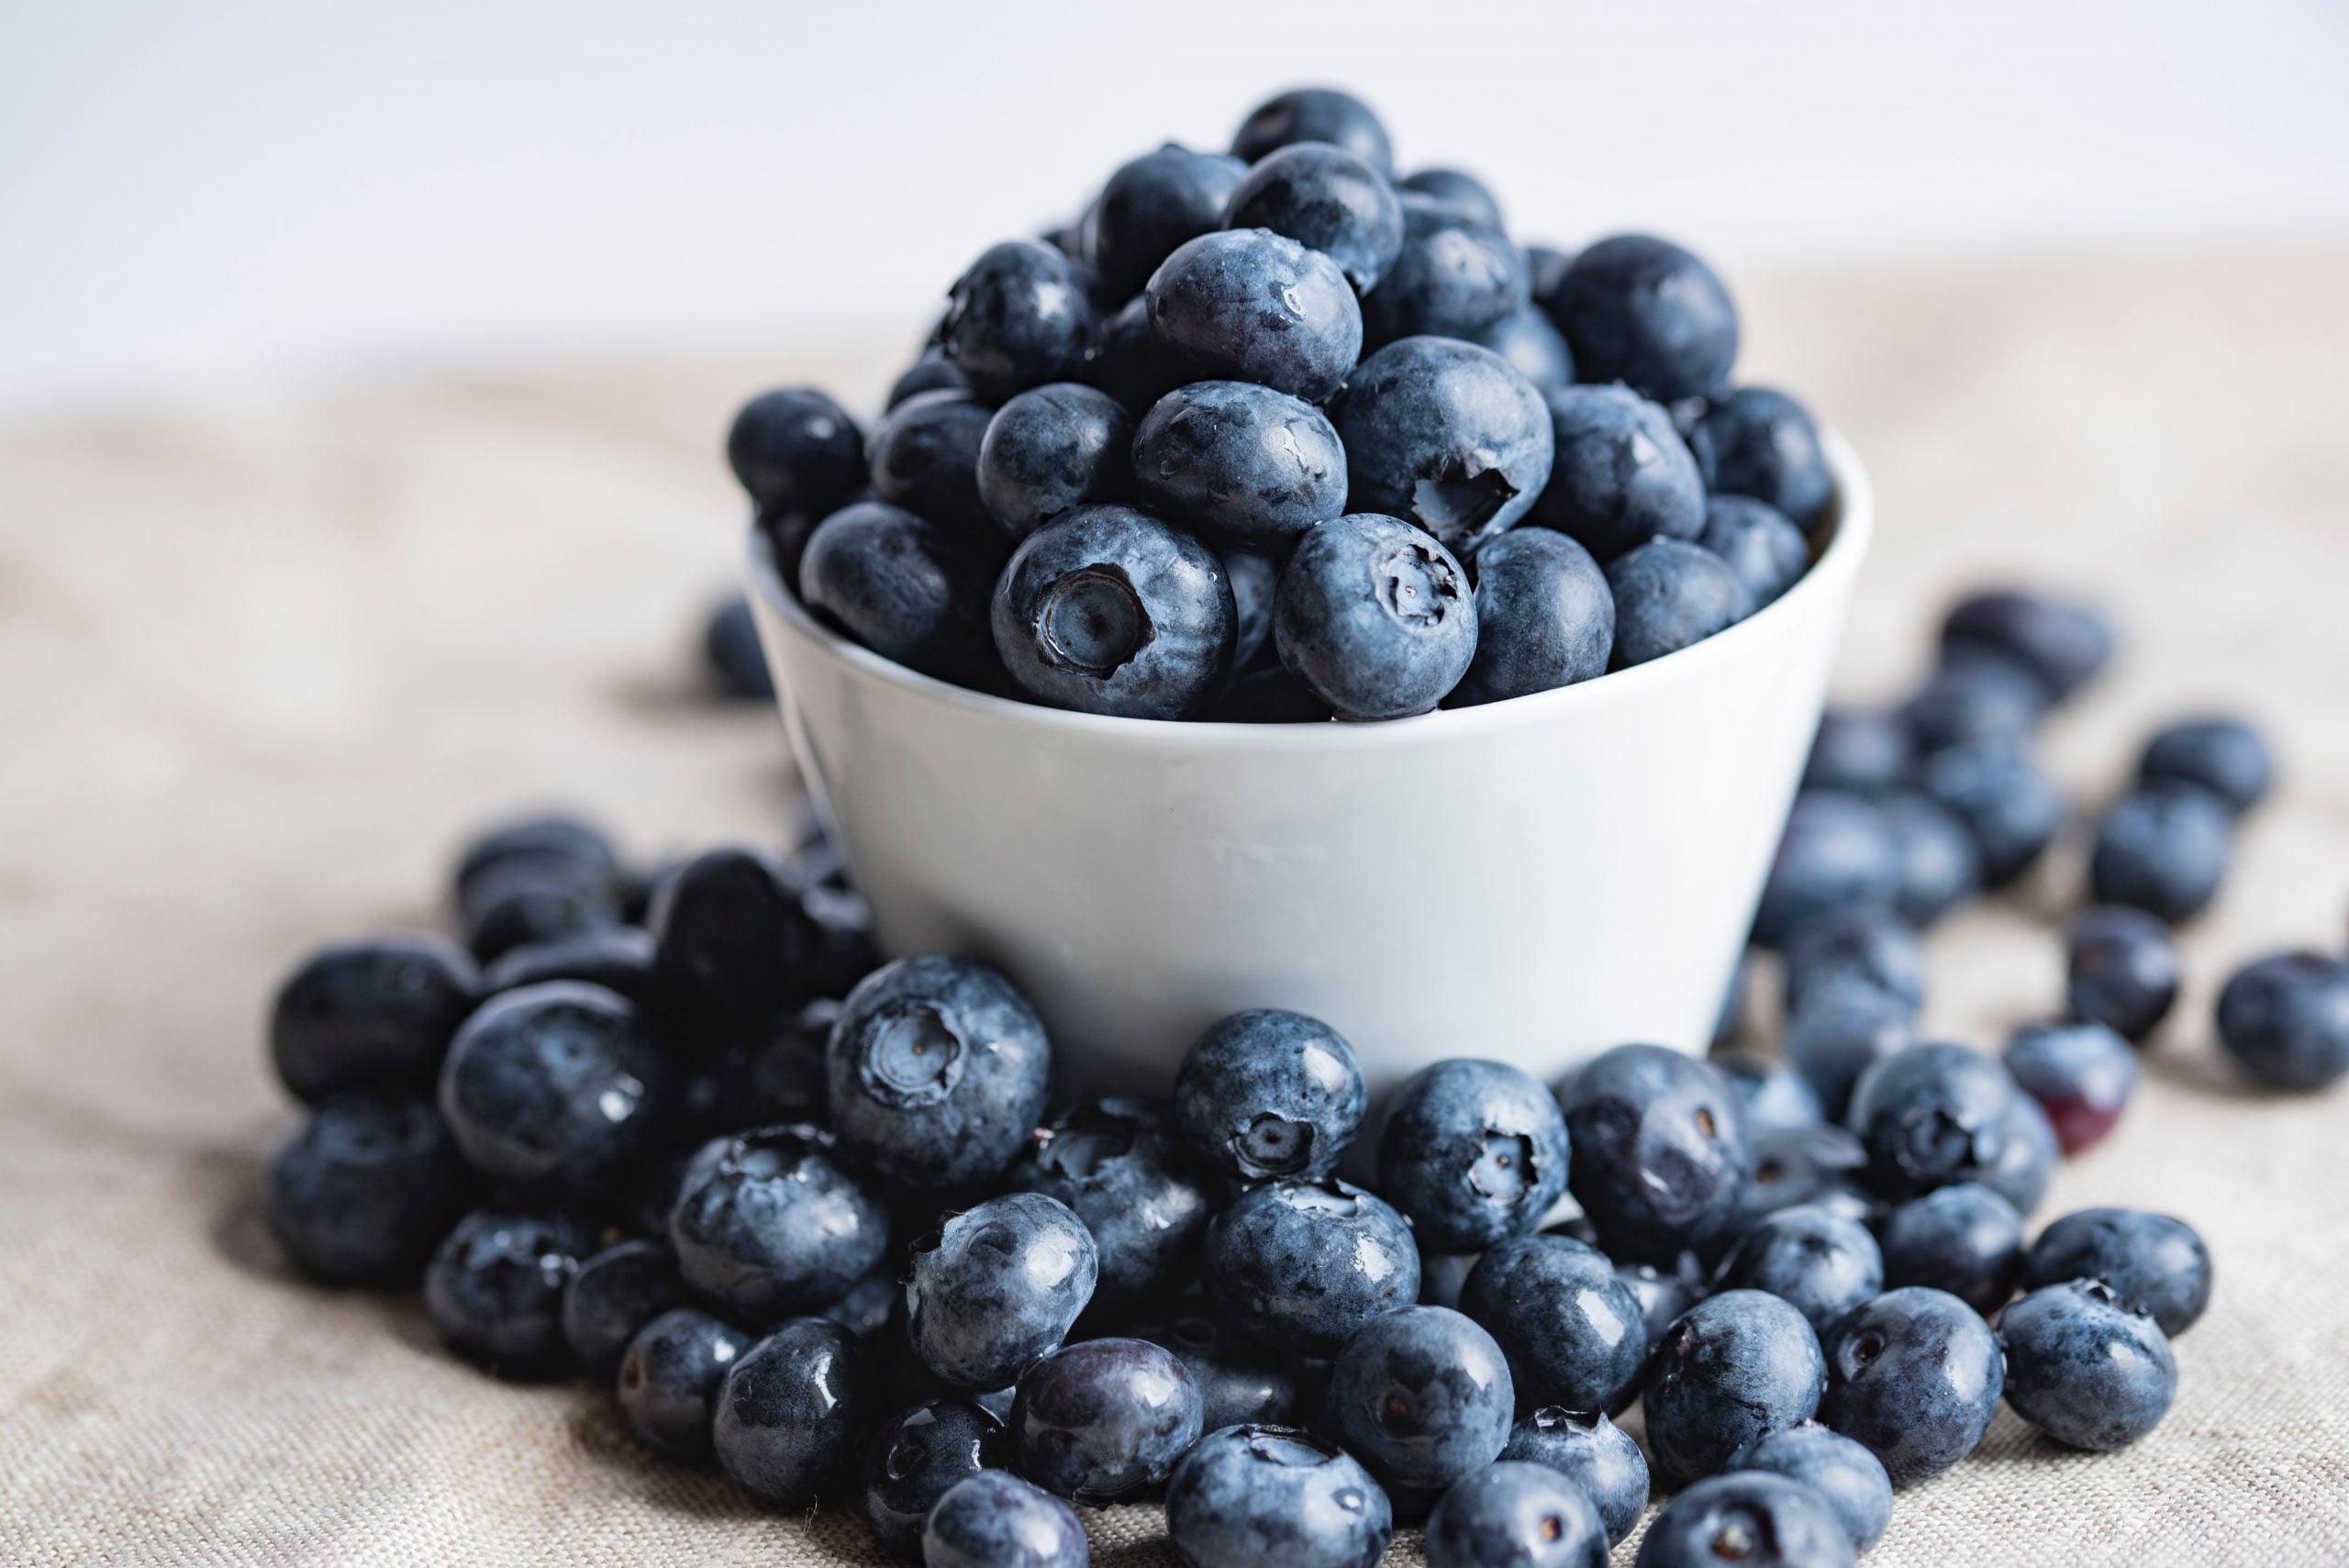 Consider eating blueberries before you working out